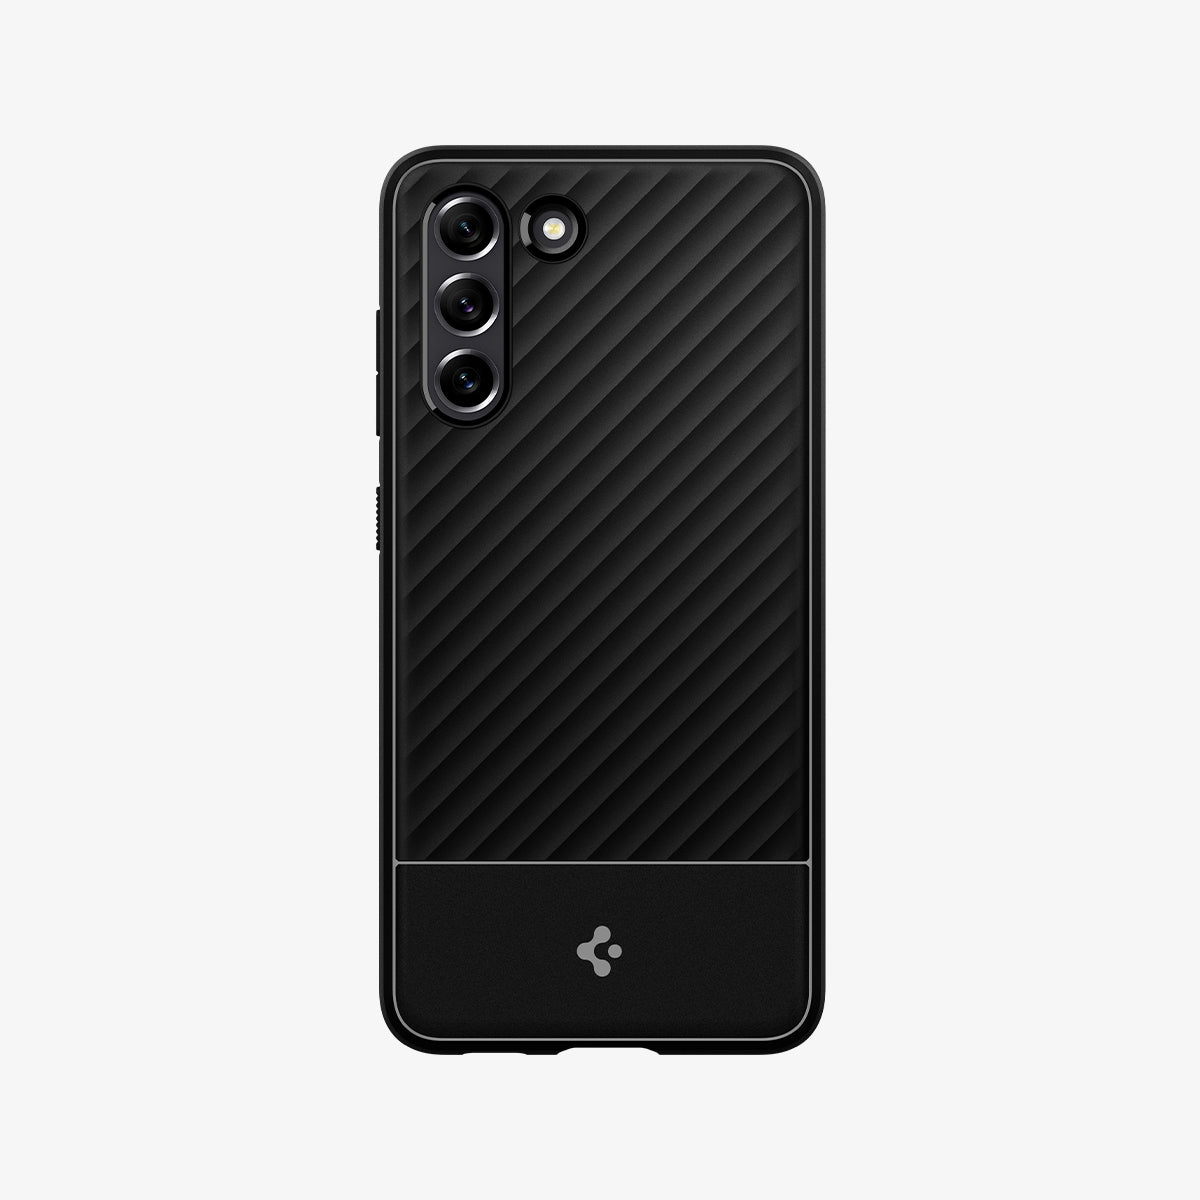 ACS03058 - Galaxy S21 FE Case Core Armor in Matte Black showing the back